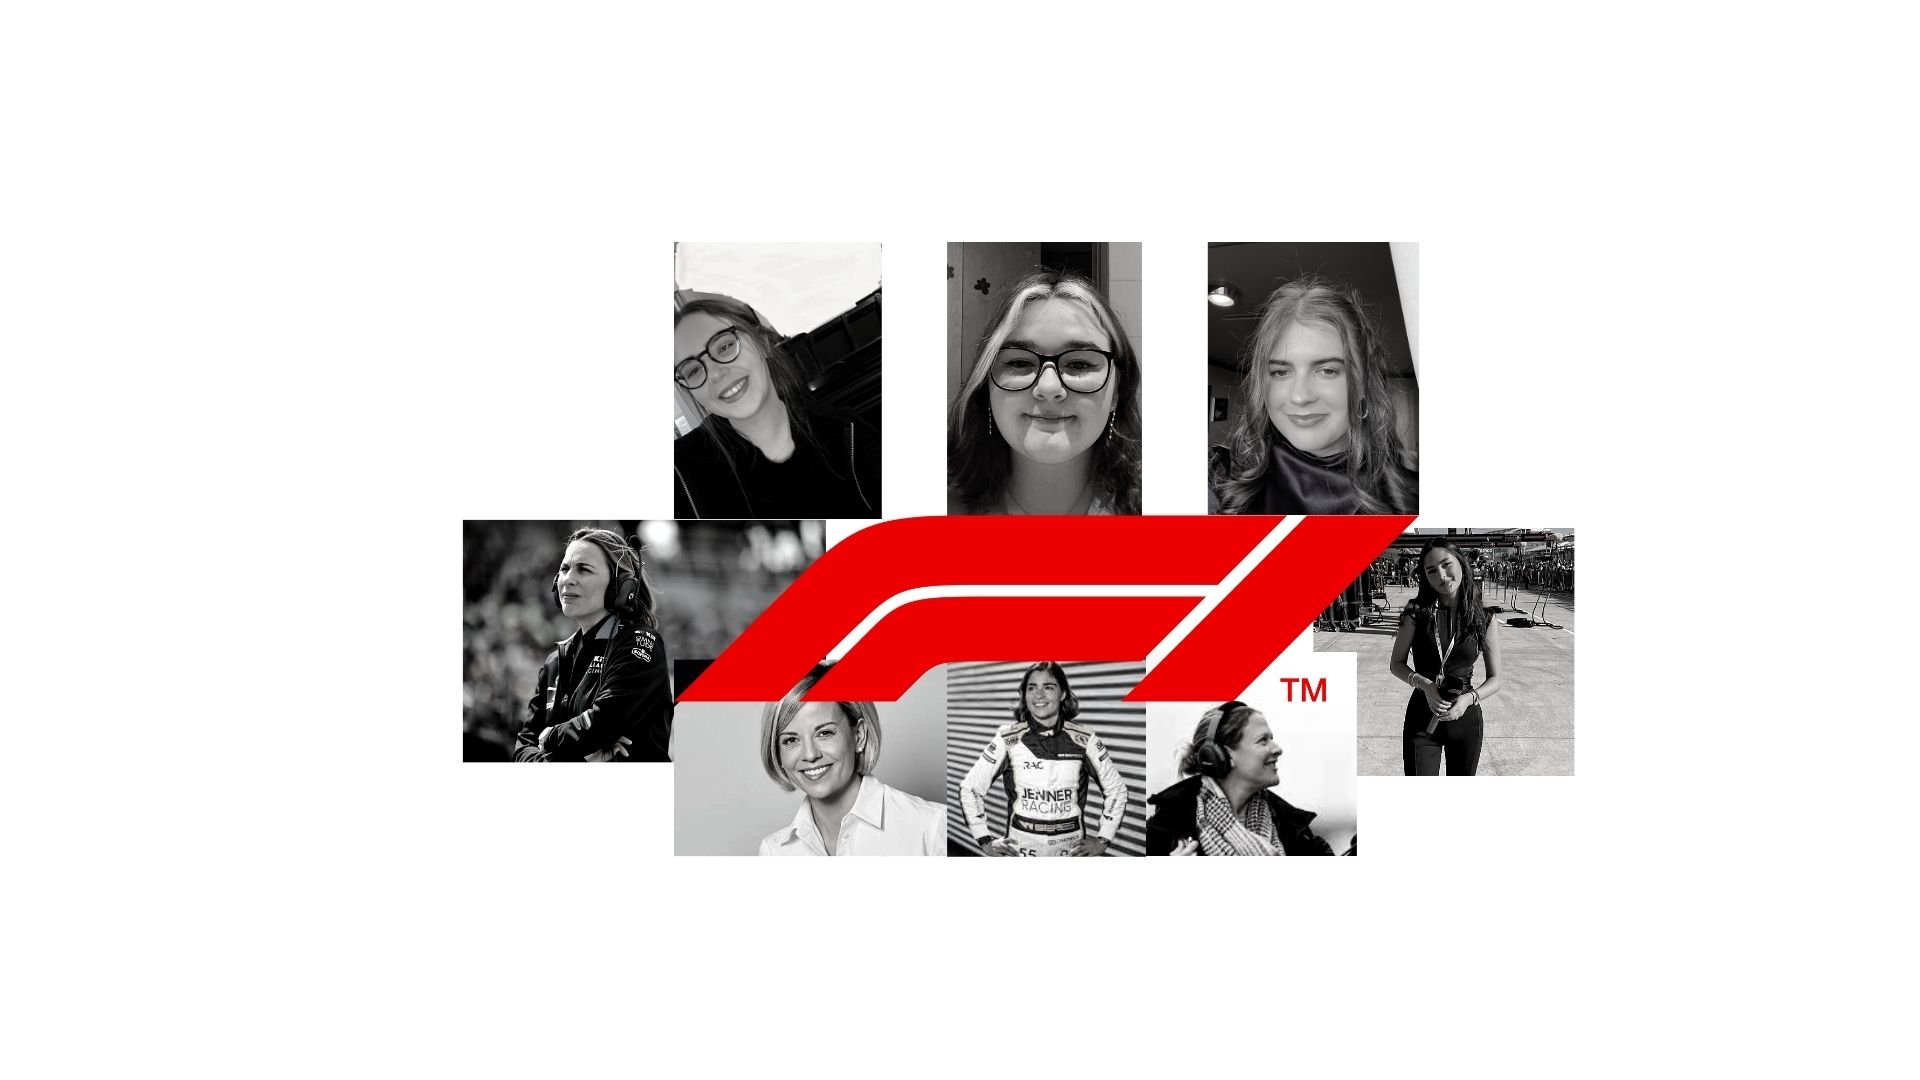 Women In Formula One- images of female fans interviewed and influencial women in the sport